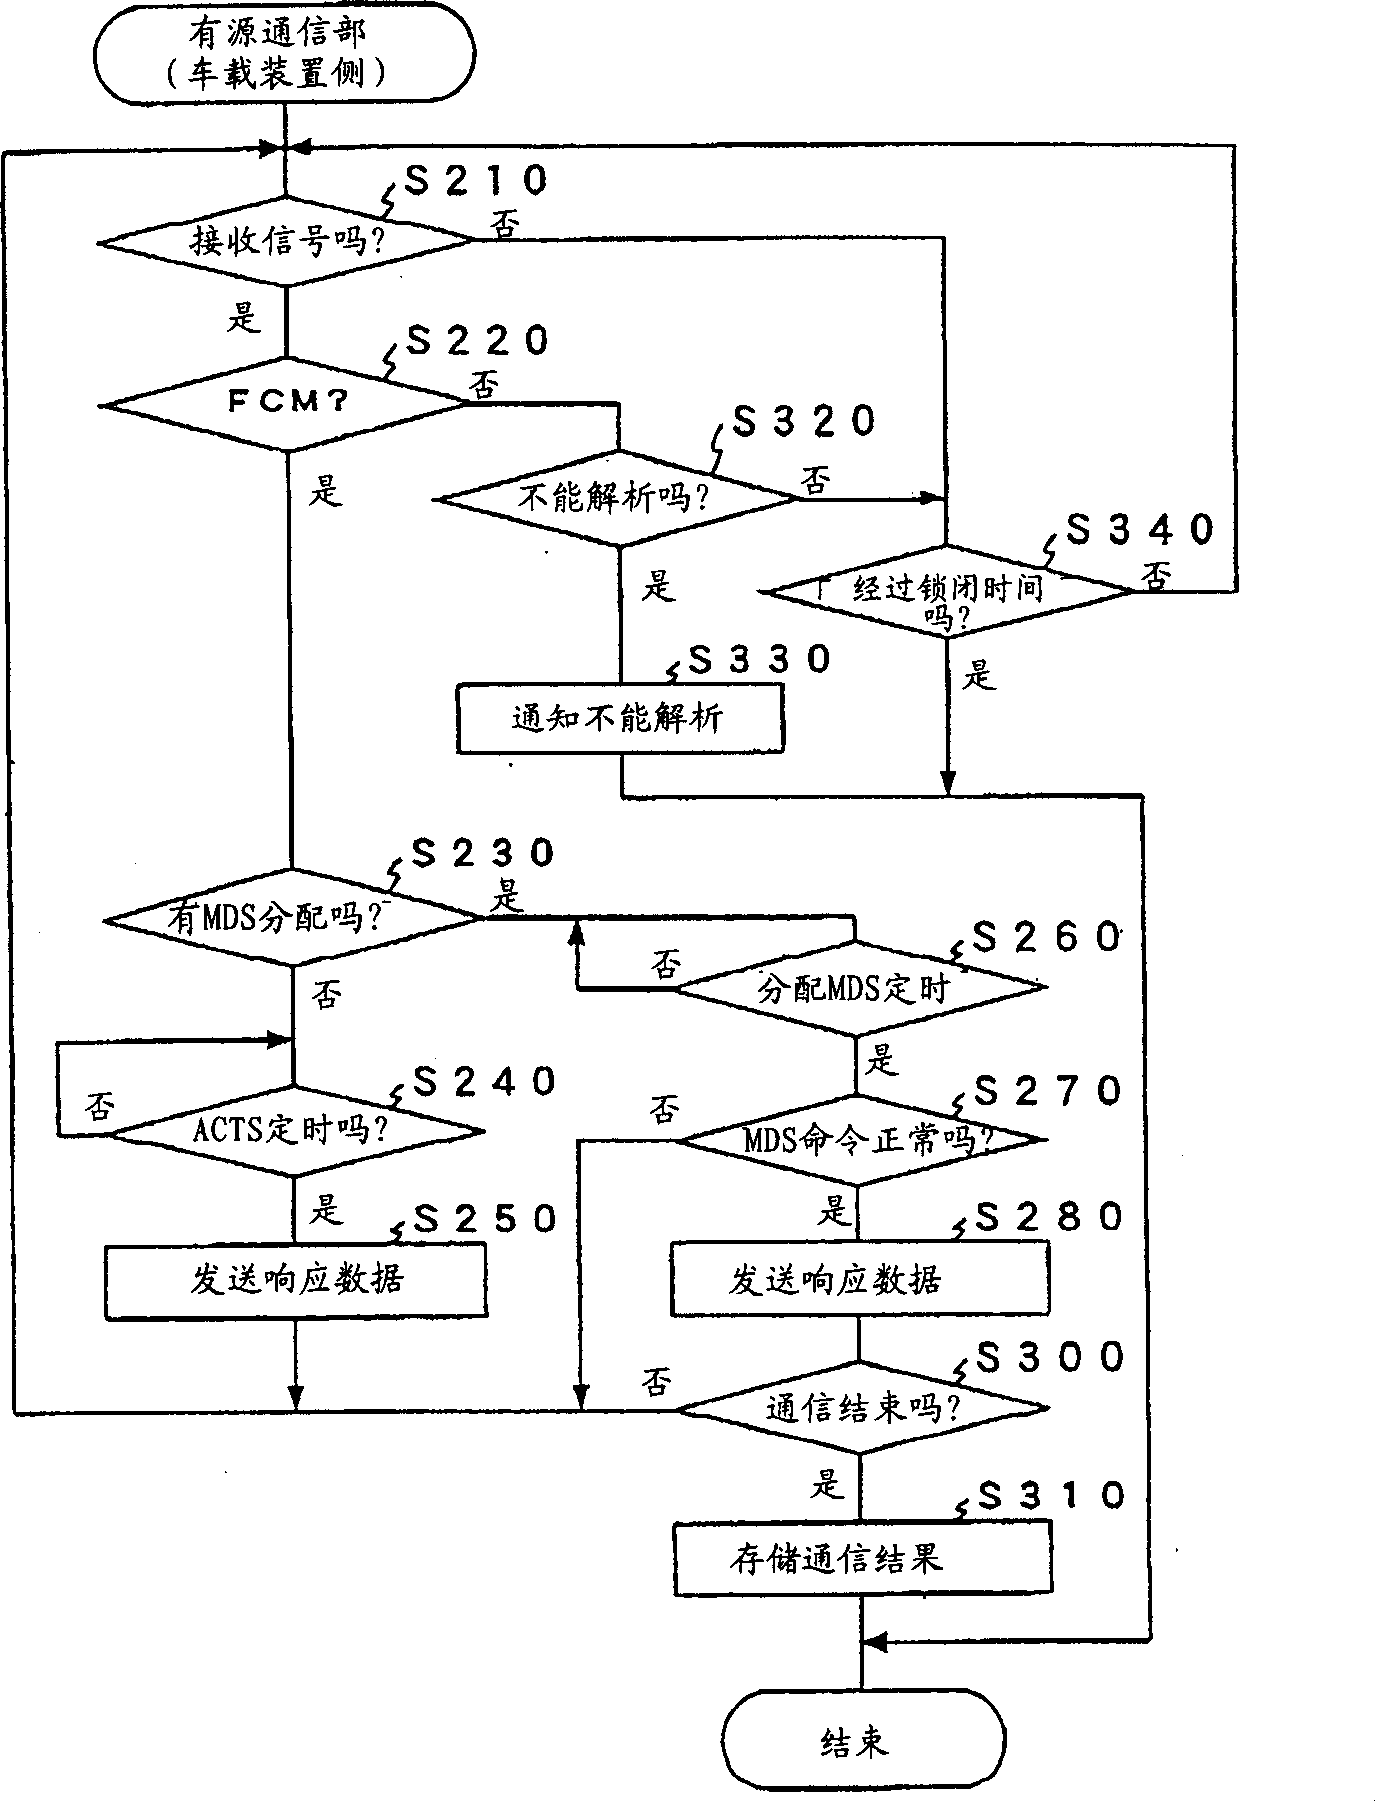 Path shop communication system, onboard device and device on road